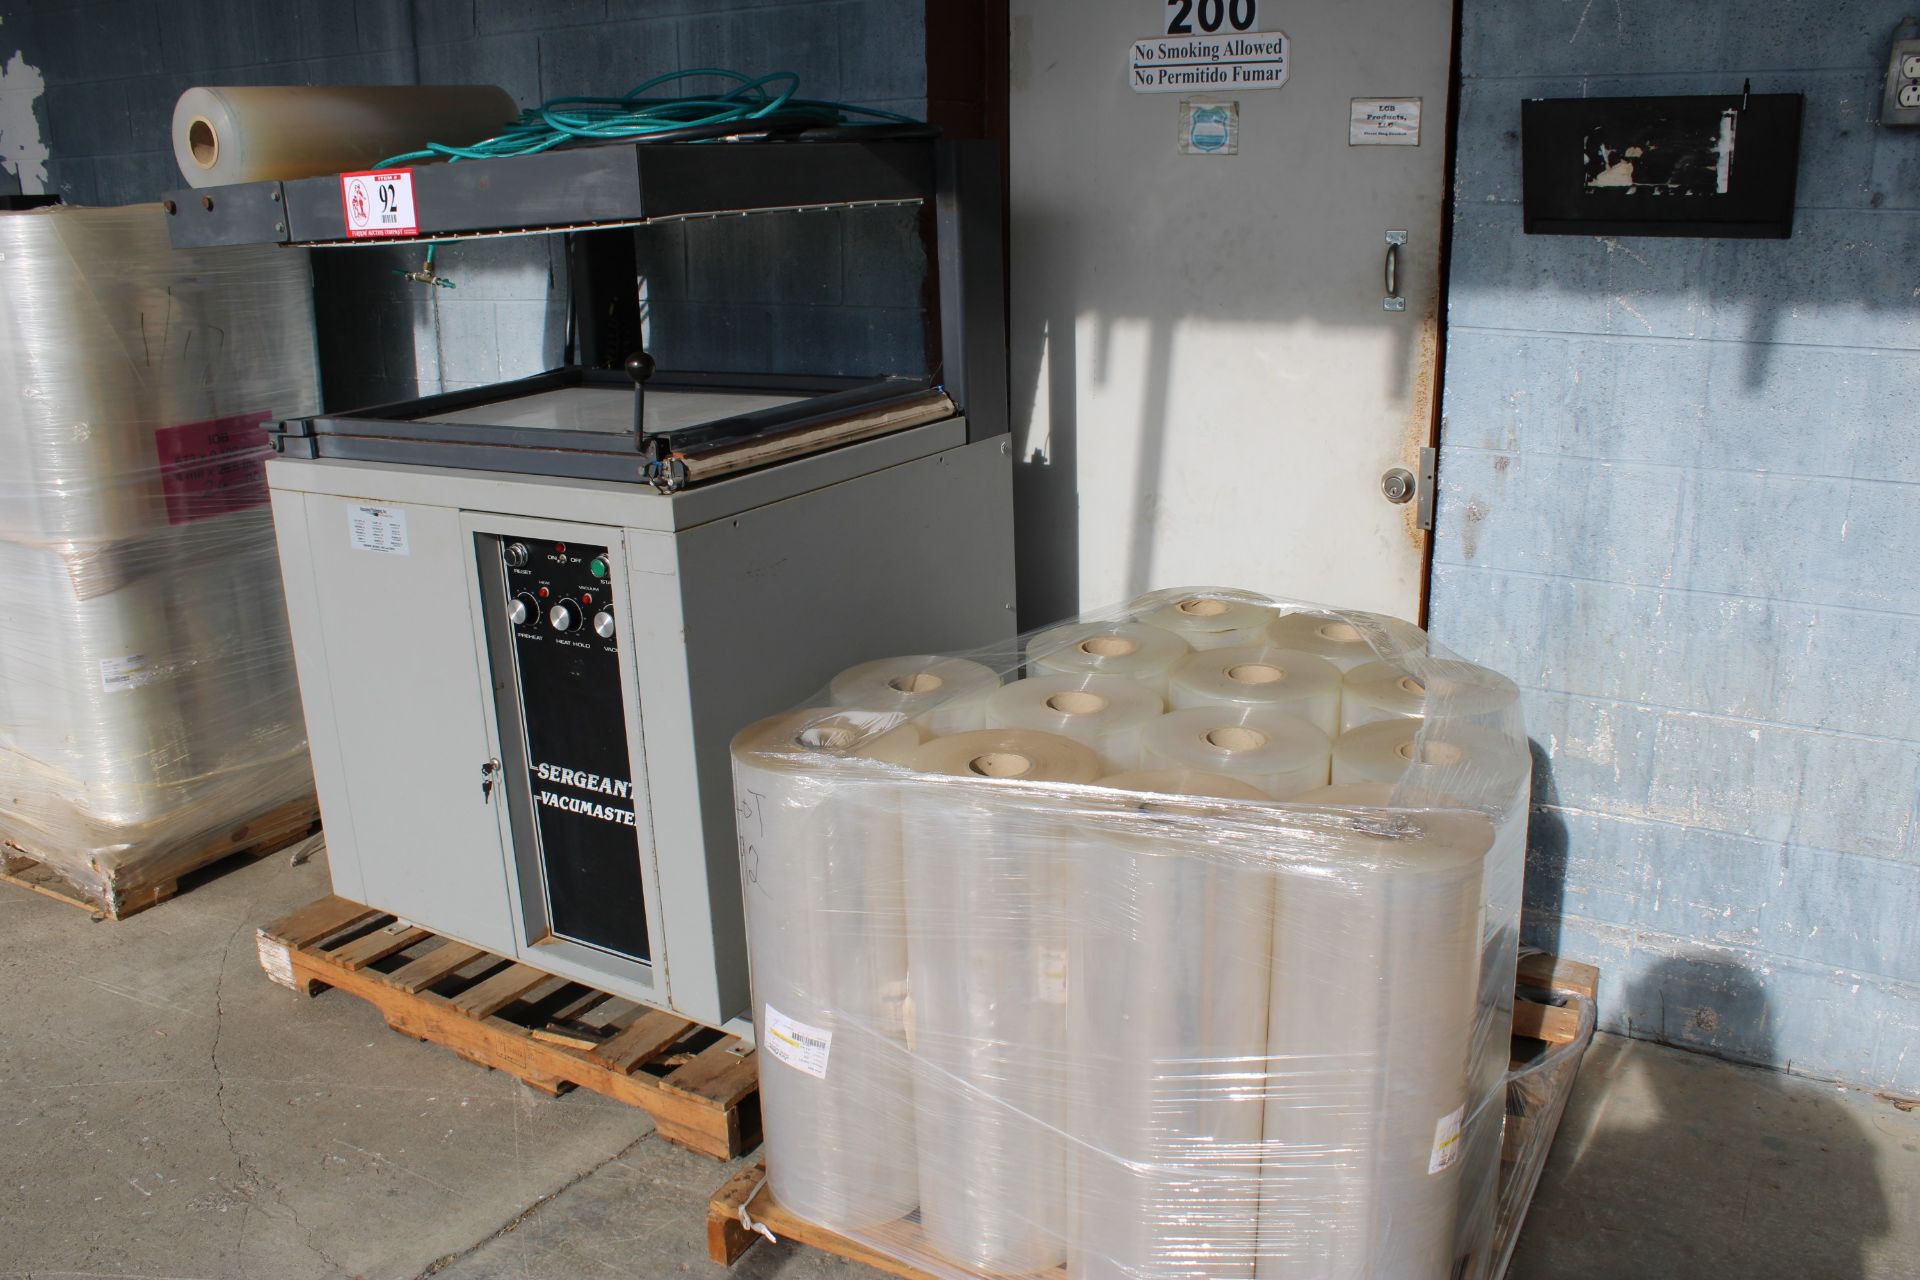 Eaton Sergeant Vacumaster w/ 14 Shrink Wrap Rolls, 24" x 30" bed that is perfect for parts - Image 2 of 2